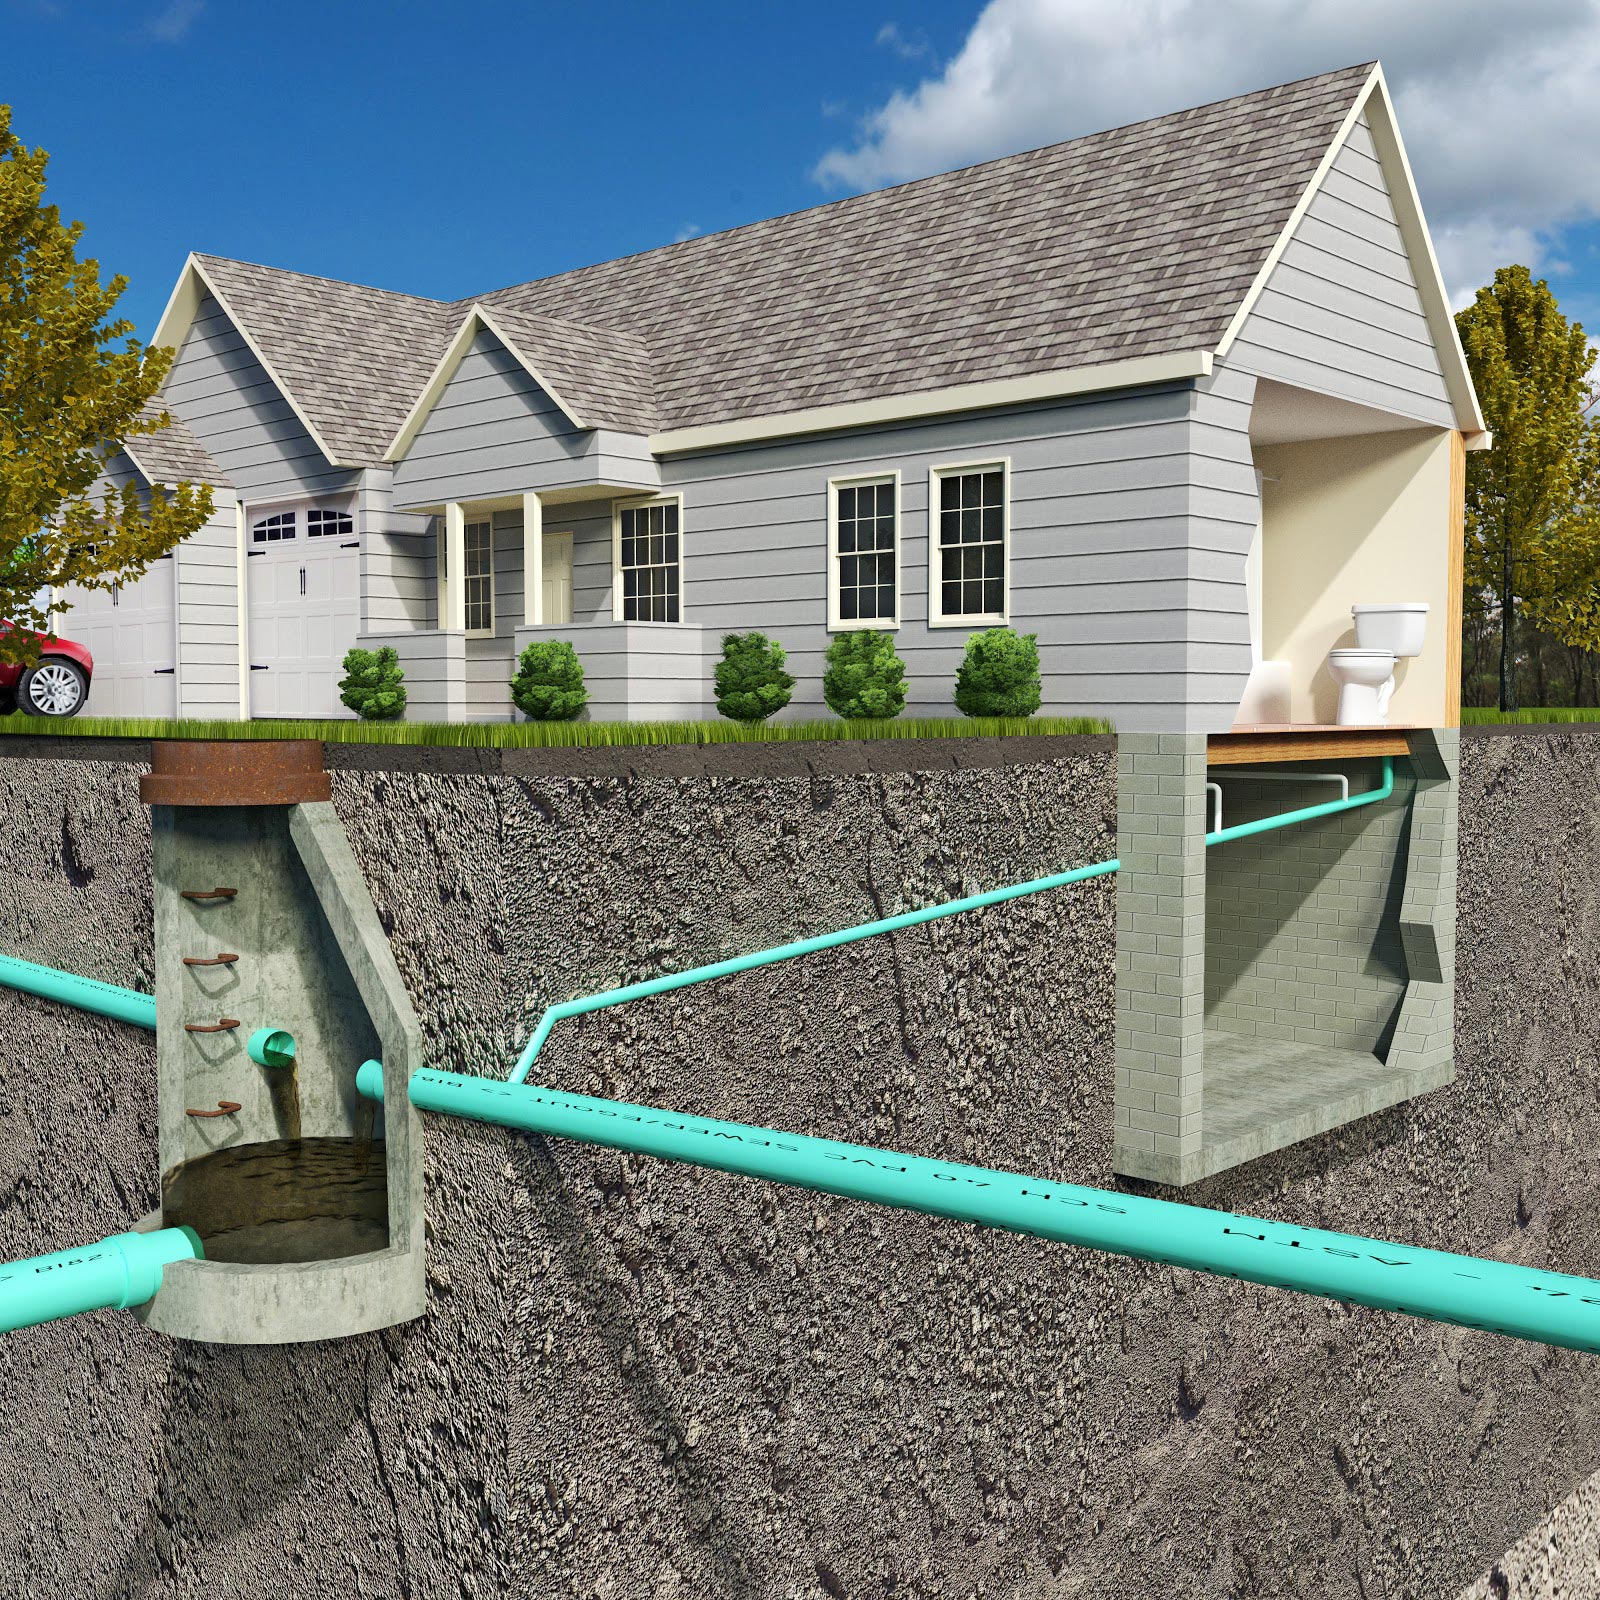 new house sewer system cutaway